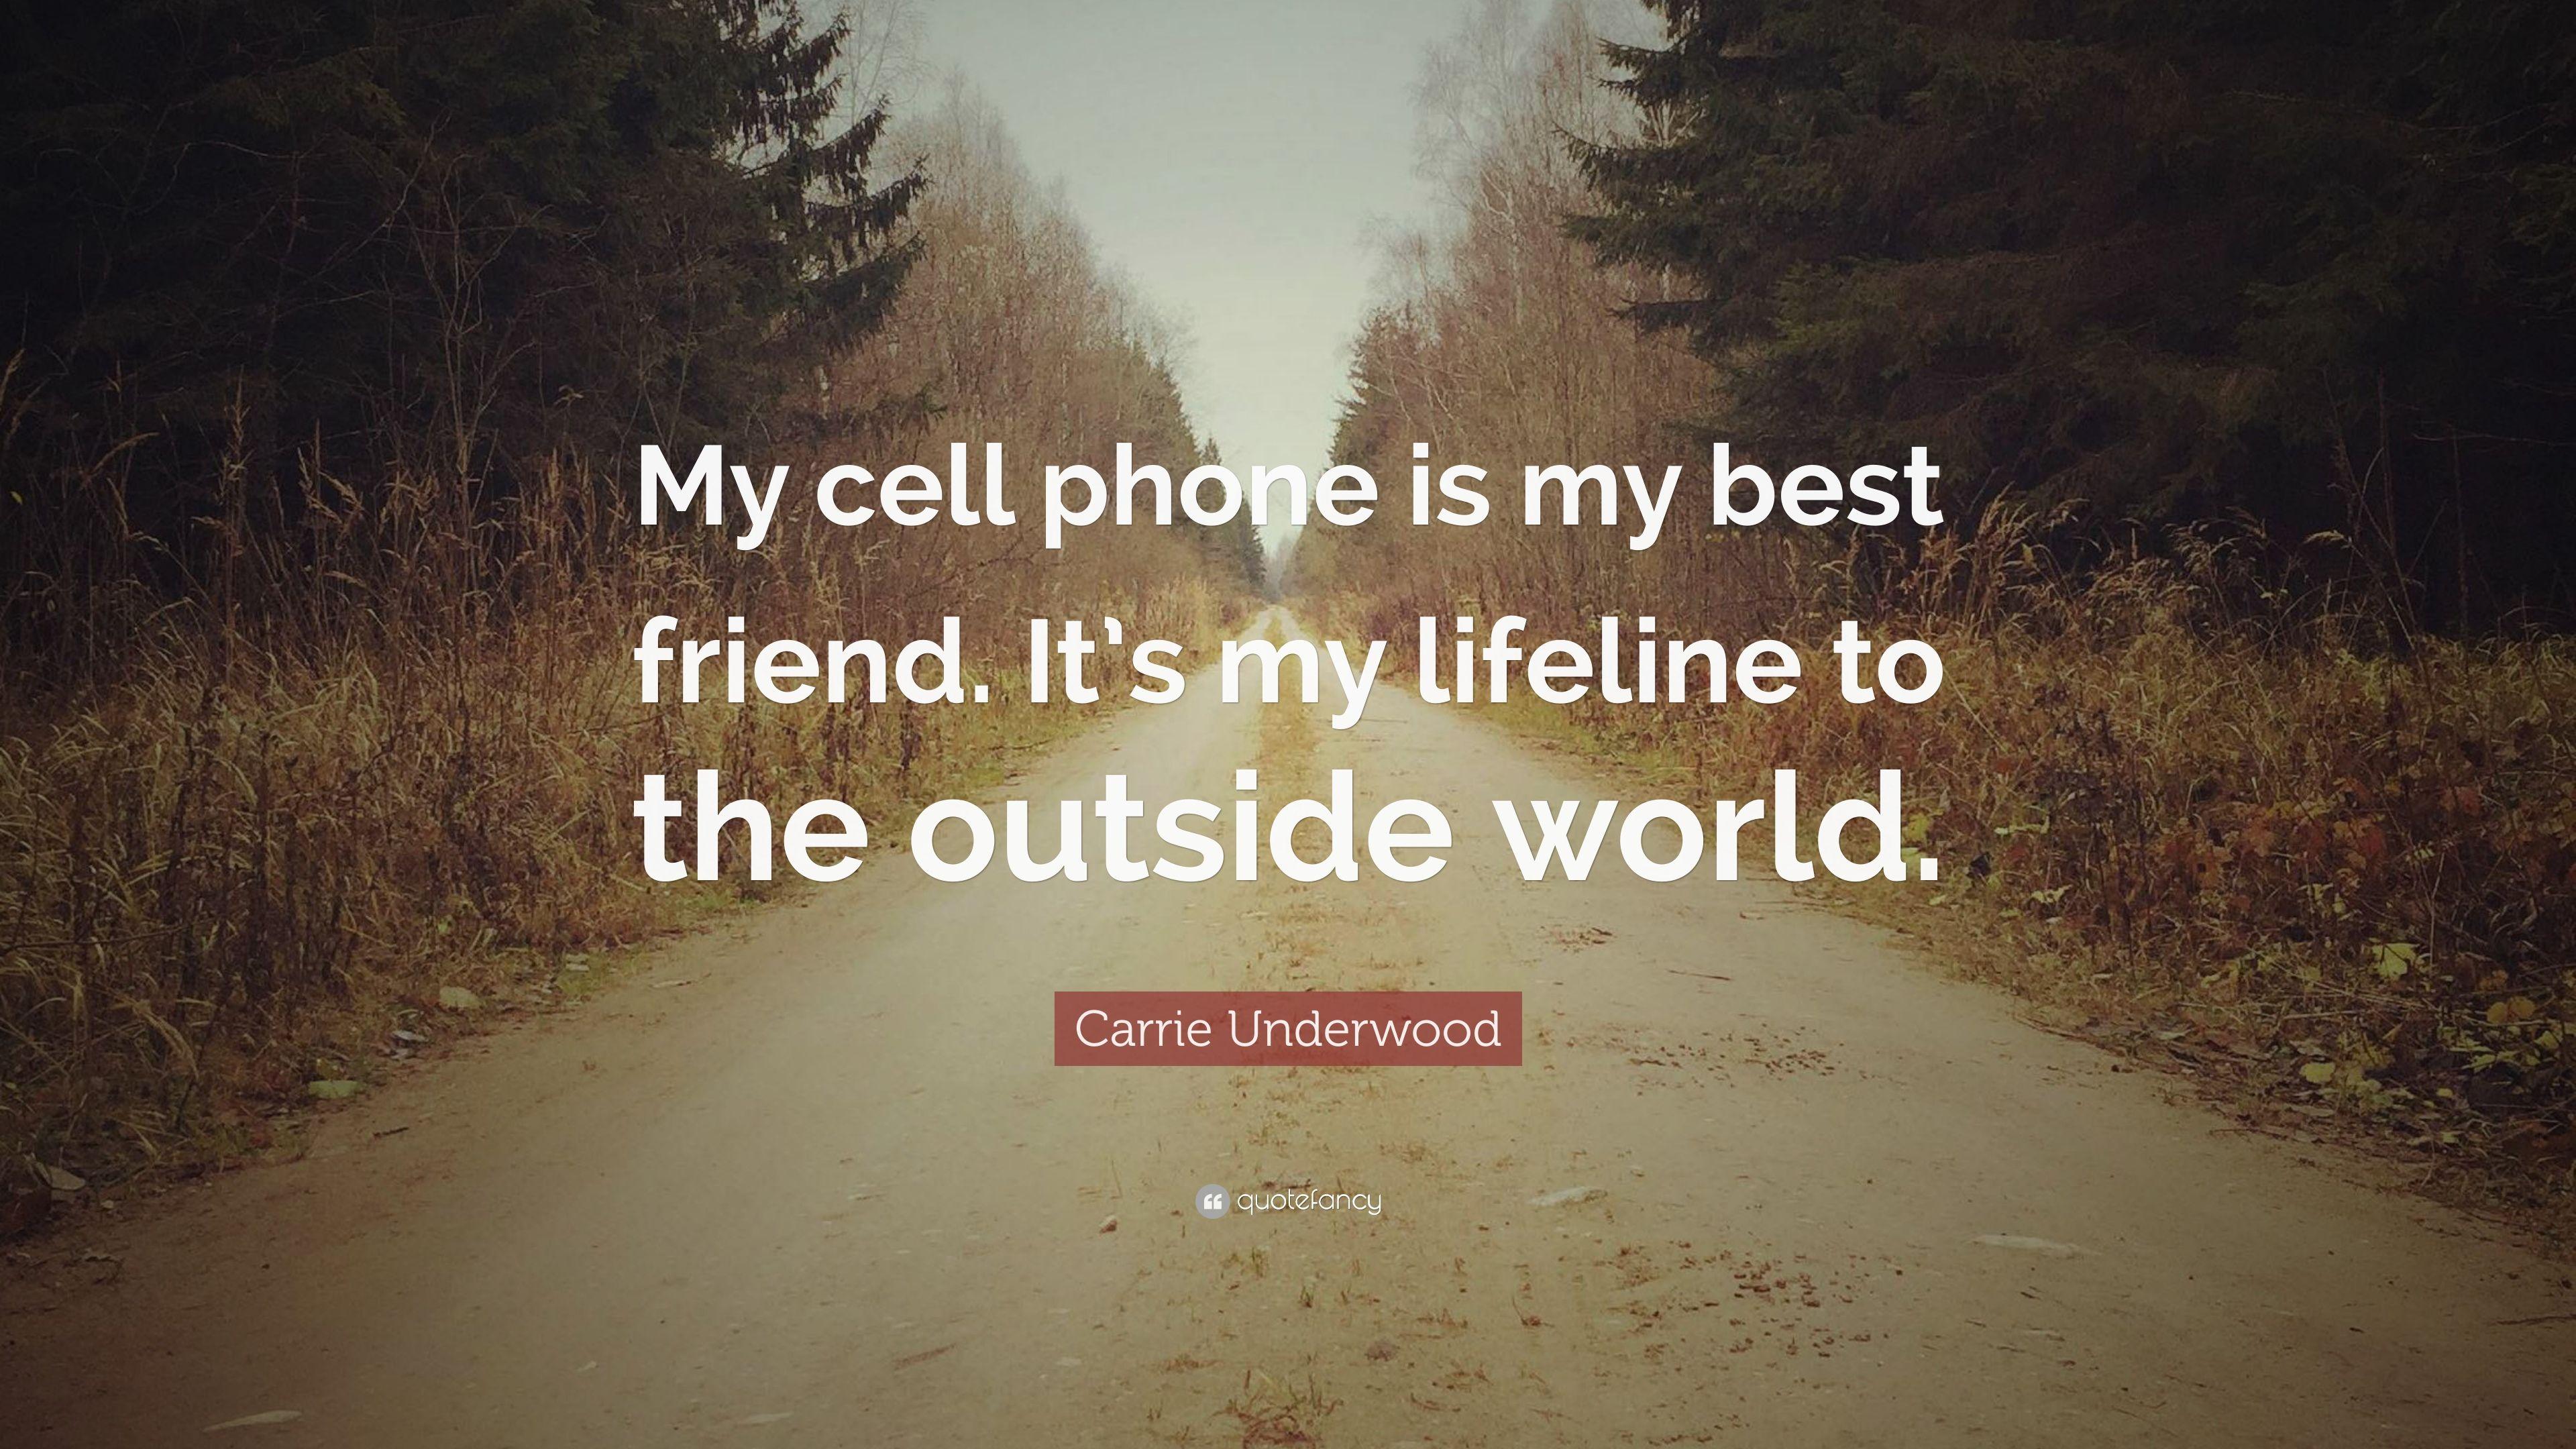 Carrie Underwood Quote: “My cell phone is my best friend. It's my